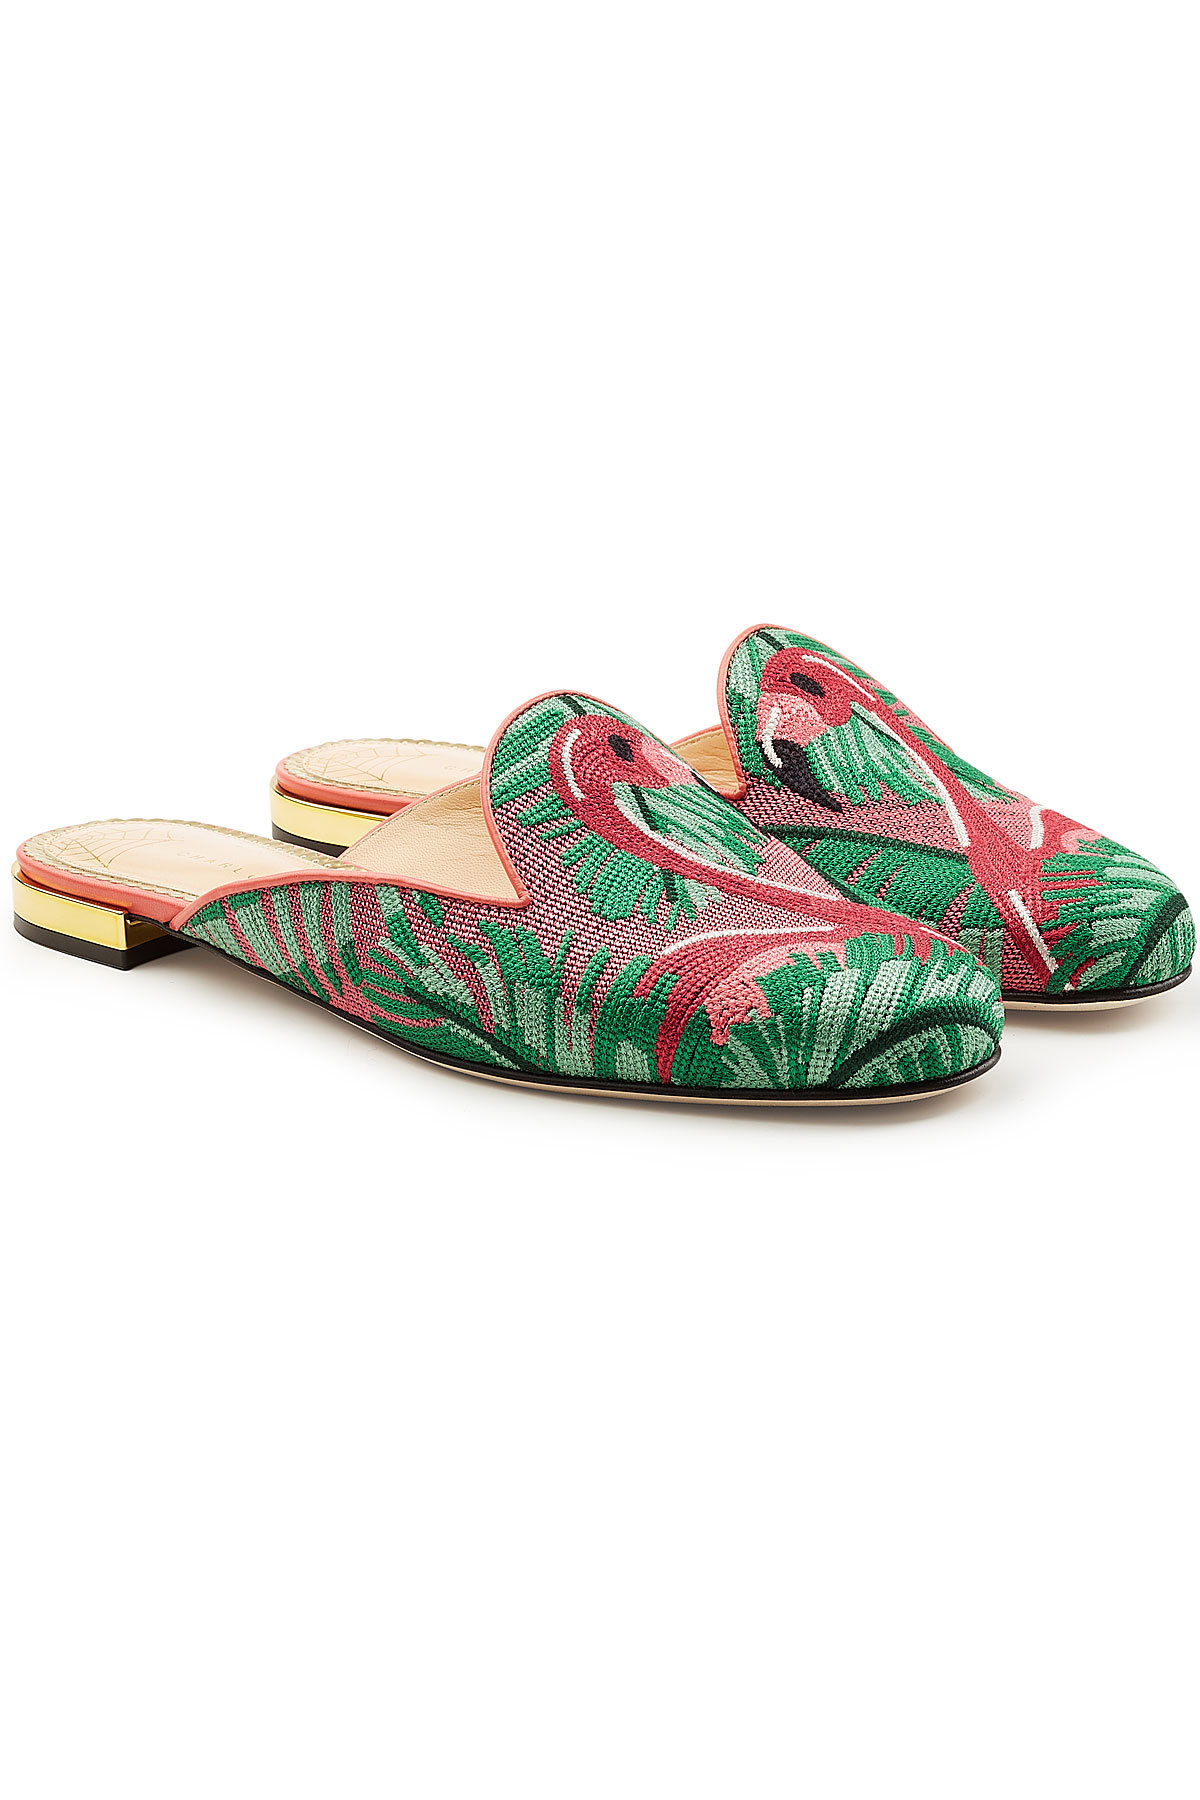 Charlotte Olympia - Flamingo Loafer Slippers